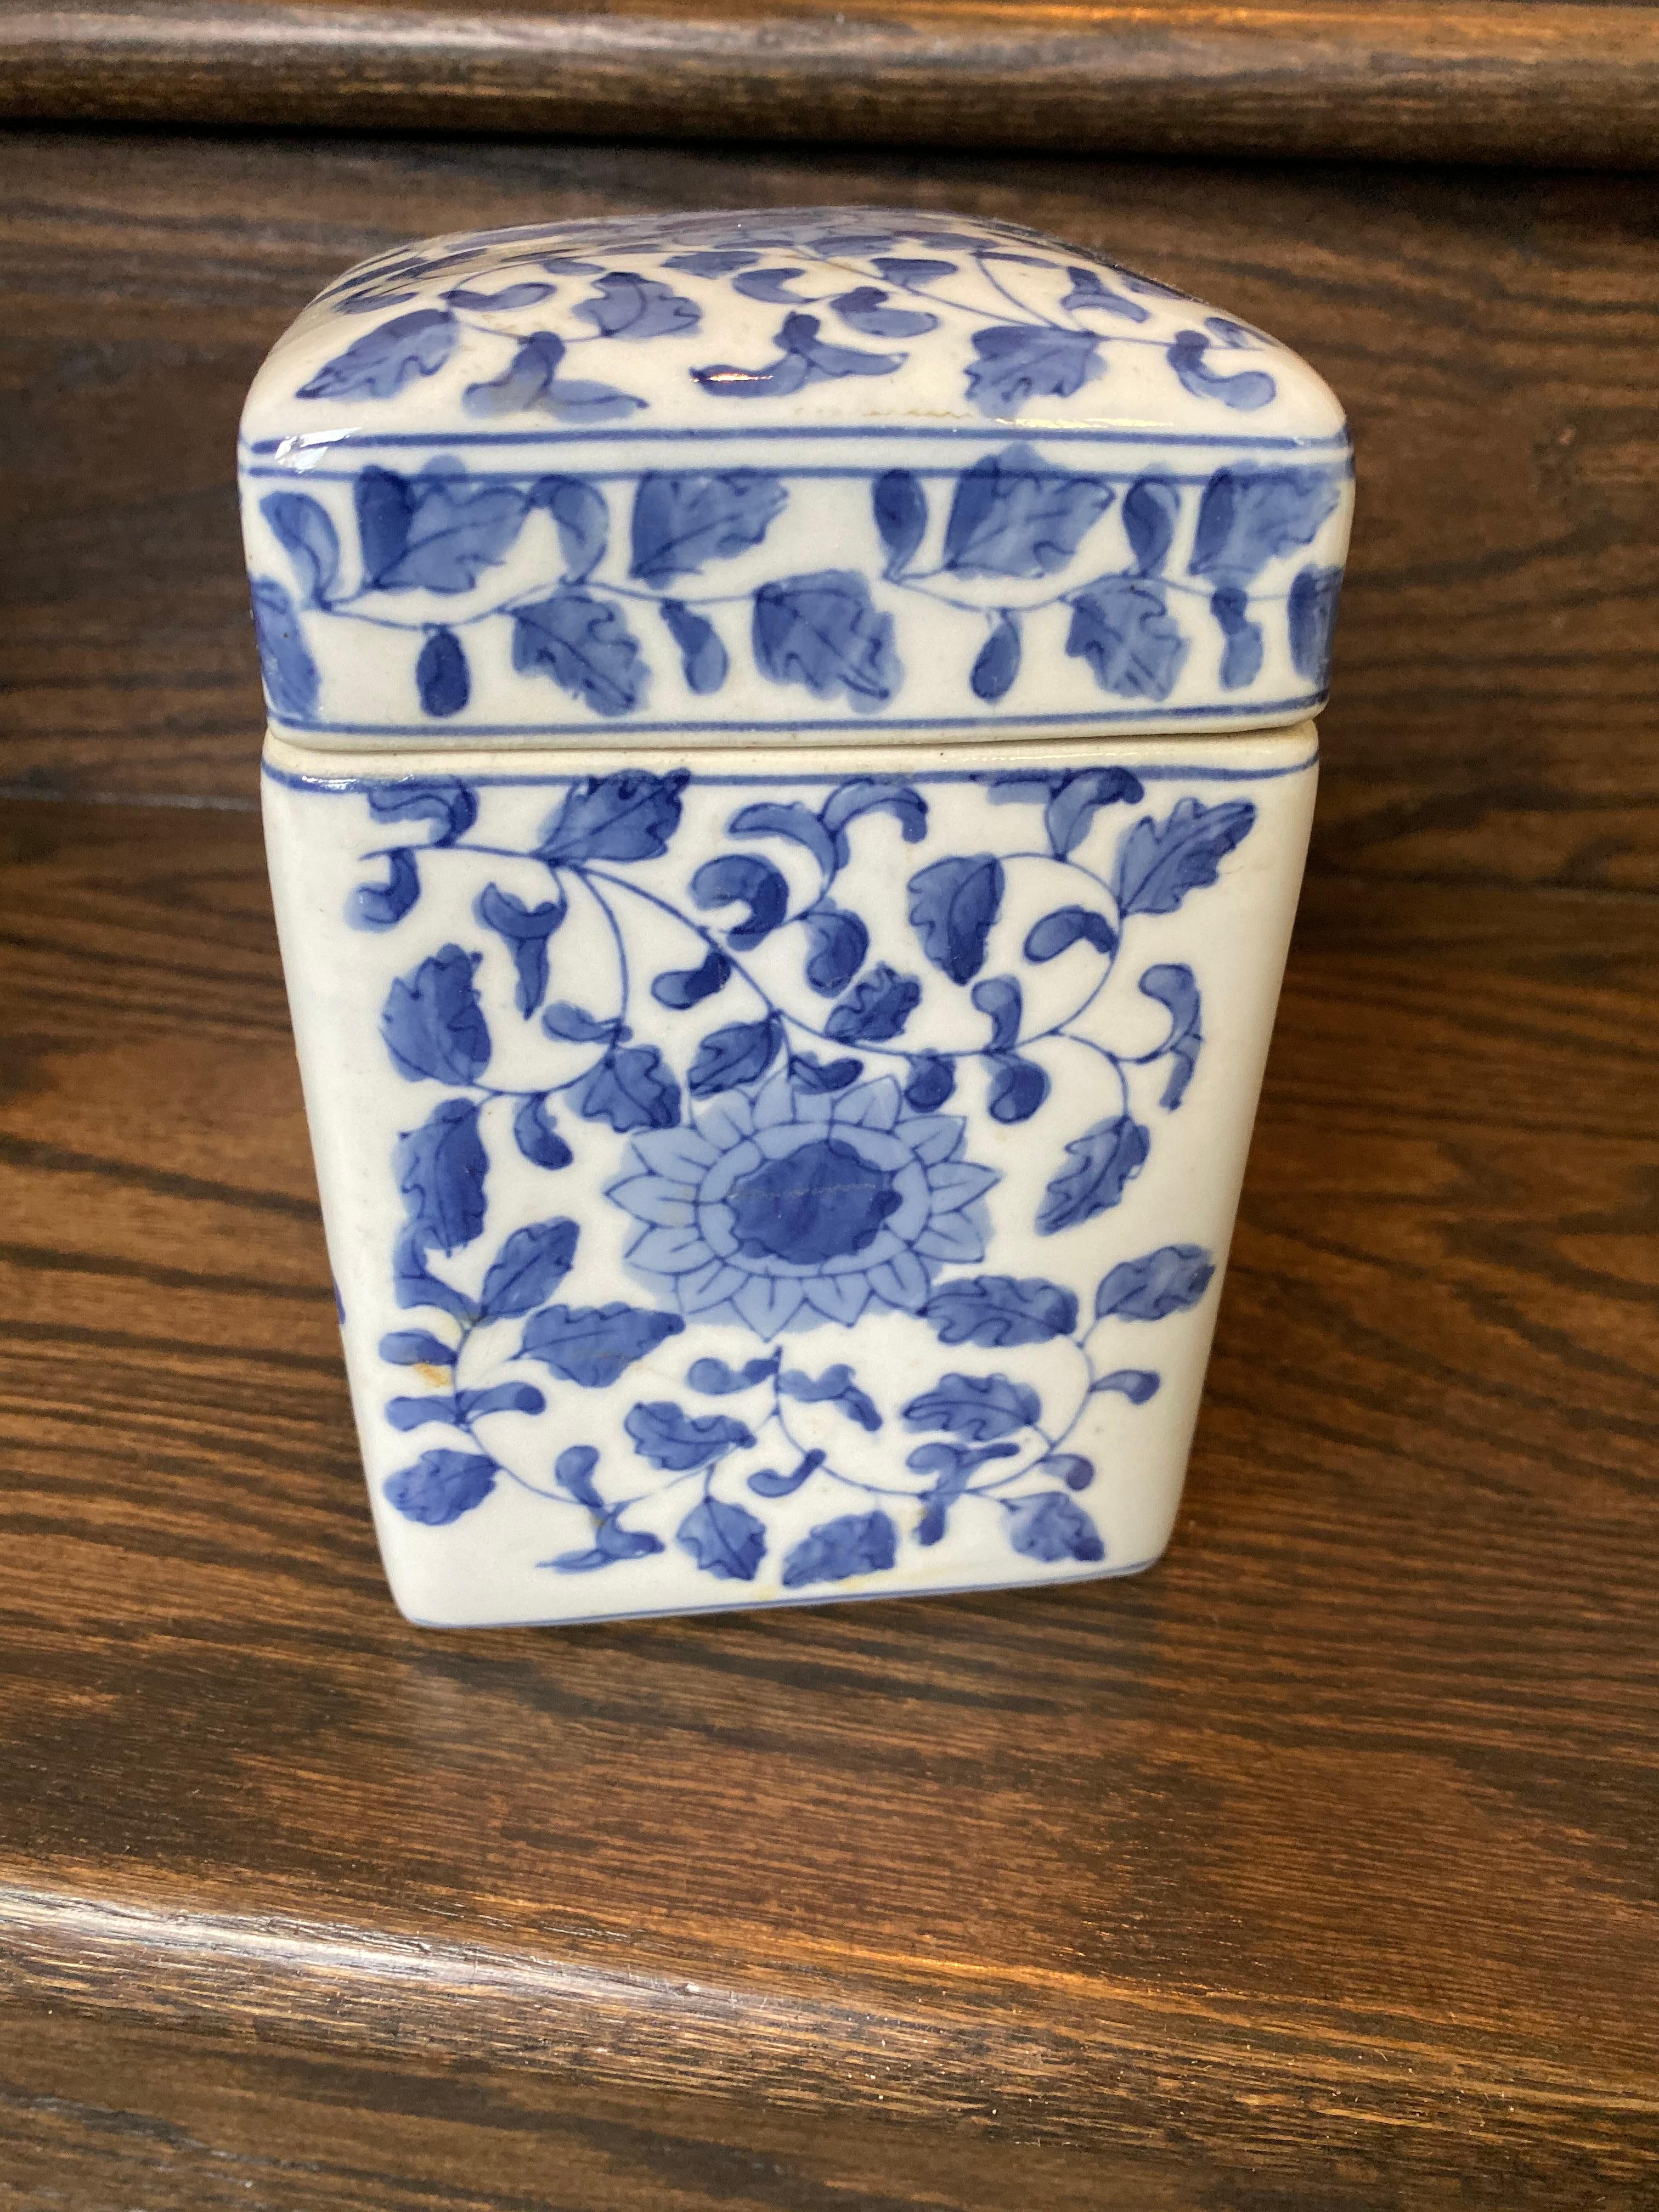 This blue and white square tea jar is handmade and hand painted with traditional blue and white motif
Hand painted using traditional Chinese painting technique of soft and feathery brushstrokes -
Beautiful in your kitchen, bathroom, mantel